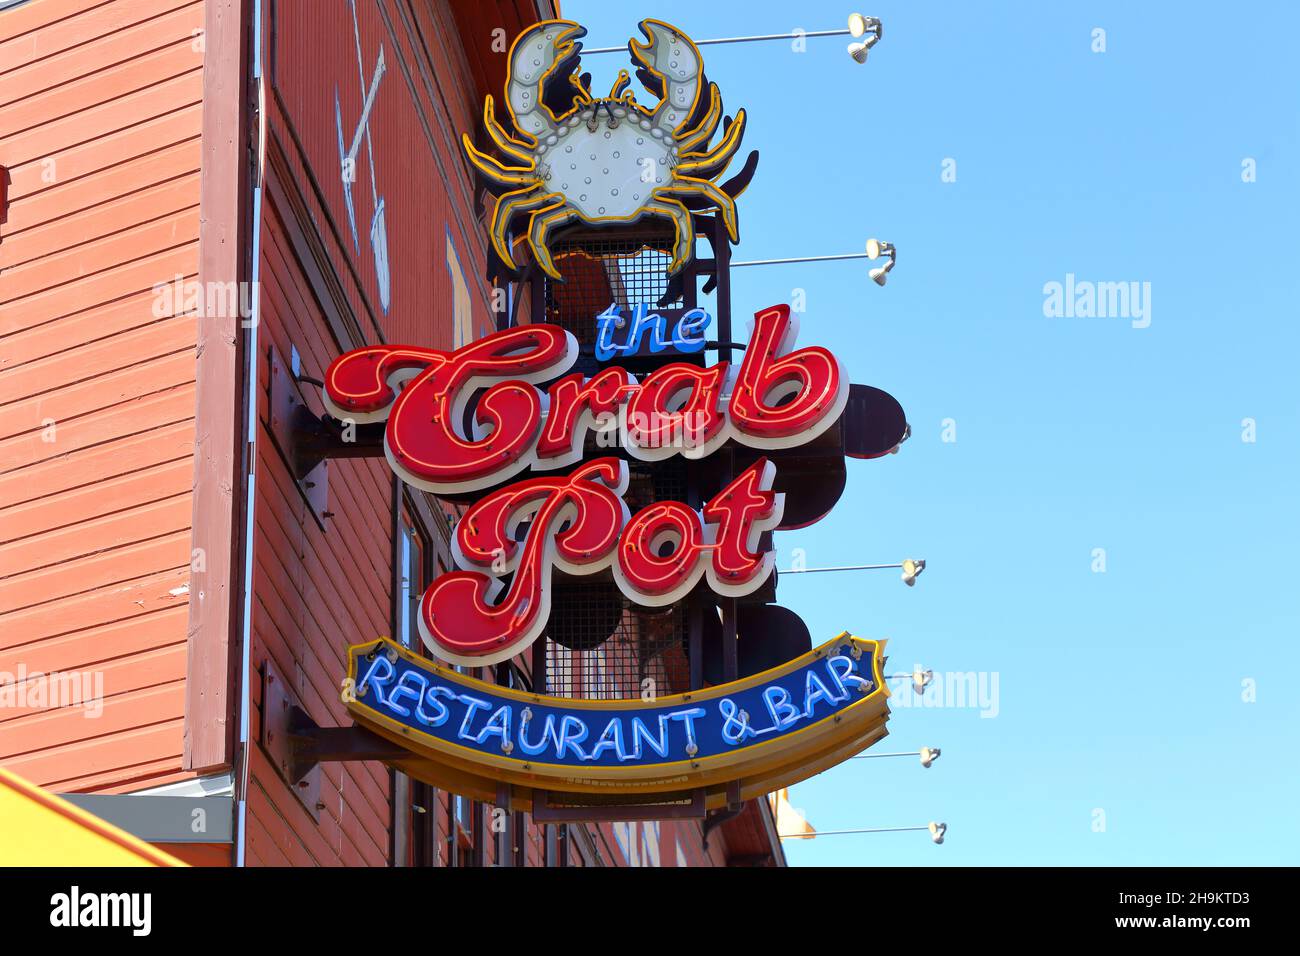 The Crab Pot, 1301 Alaskan Way, Seattle, Washington. neon sign for a seafood restaurant on Pier 57. Stock Photo